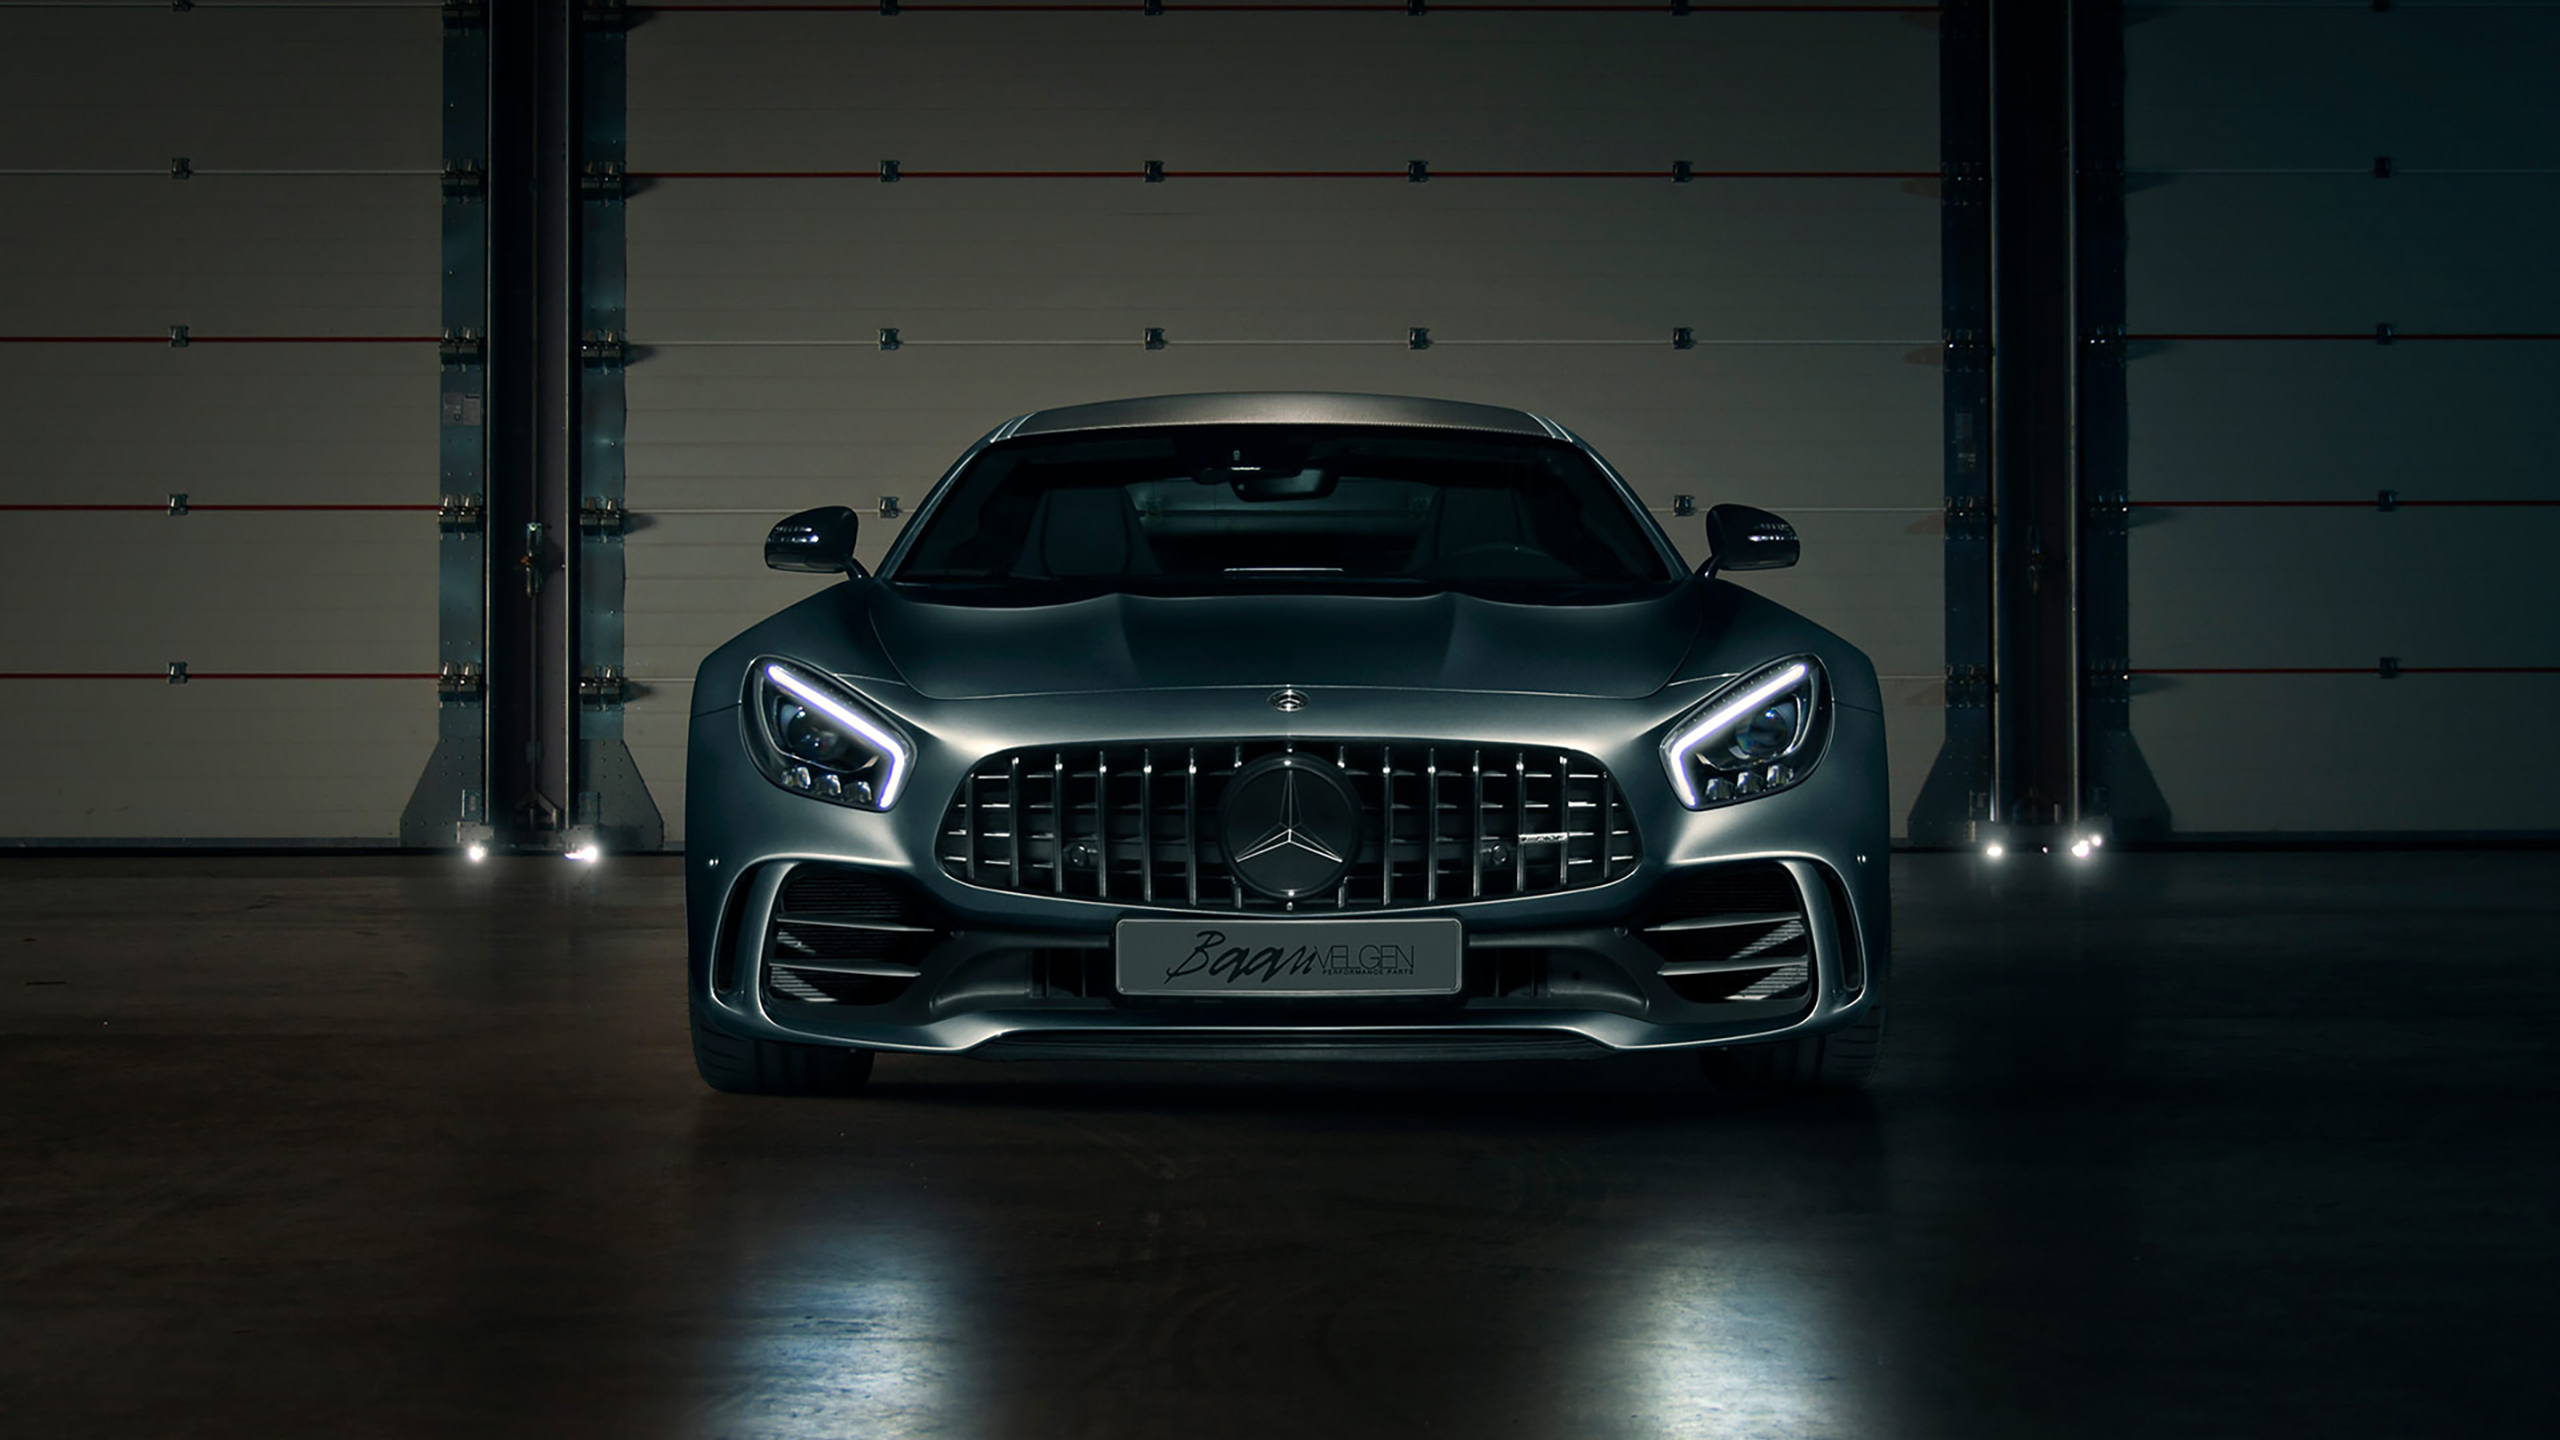 Black Mercedes Benz Amg GT HD, HD Cars, 4k Wallpapers, Images